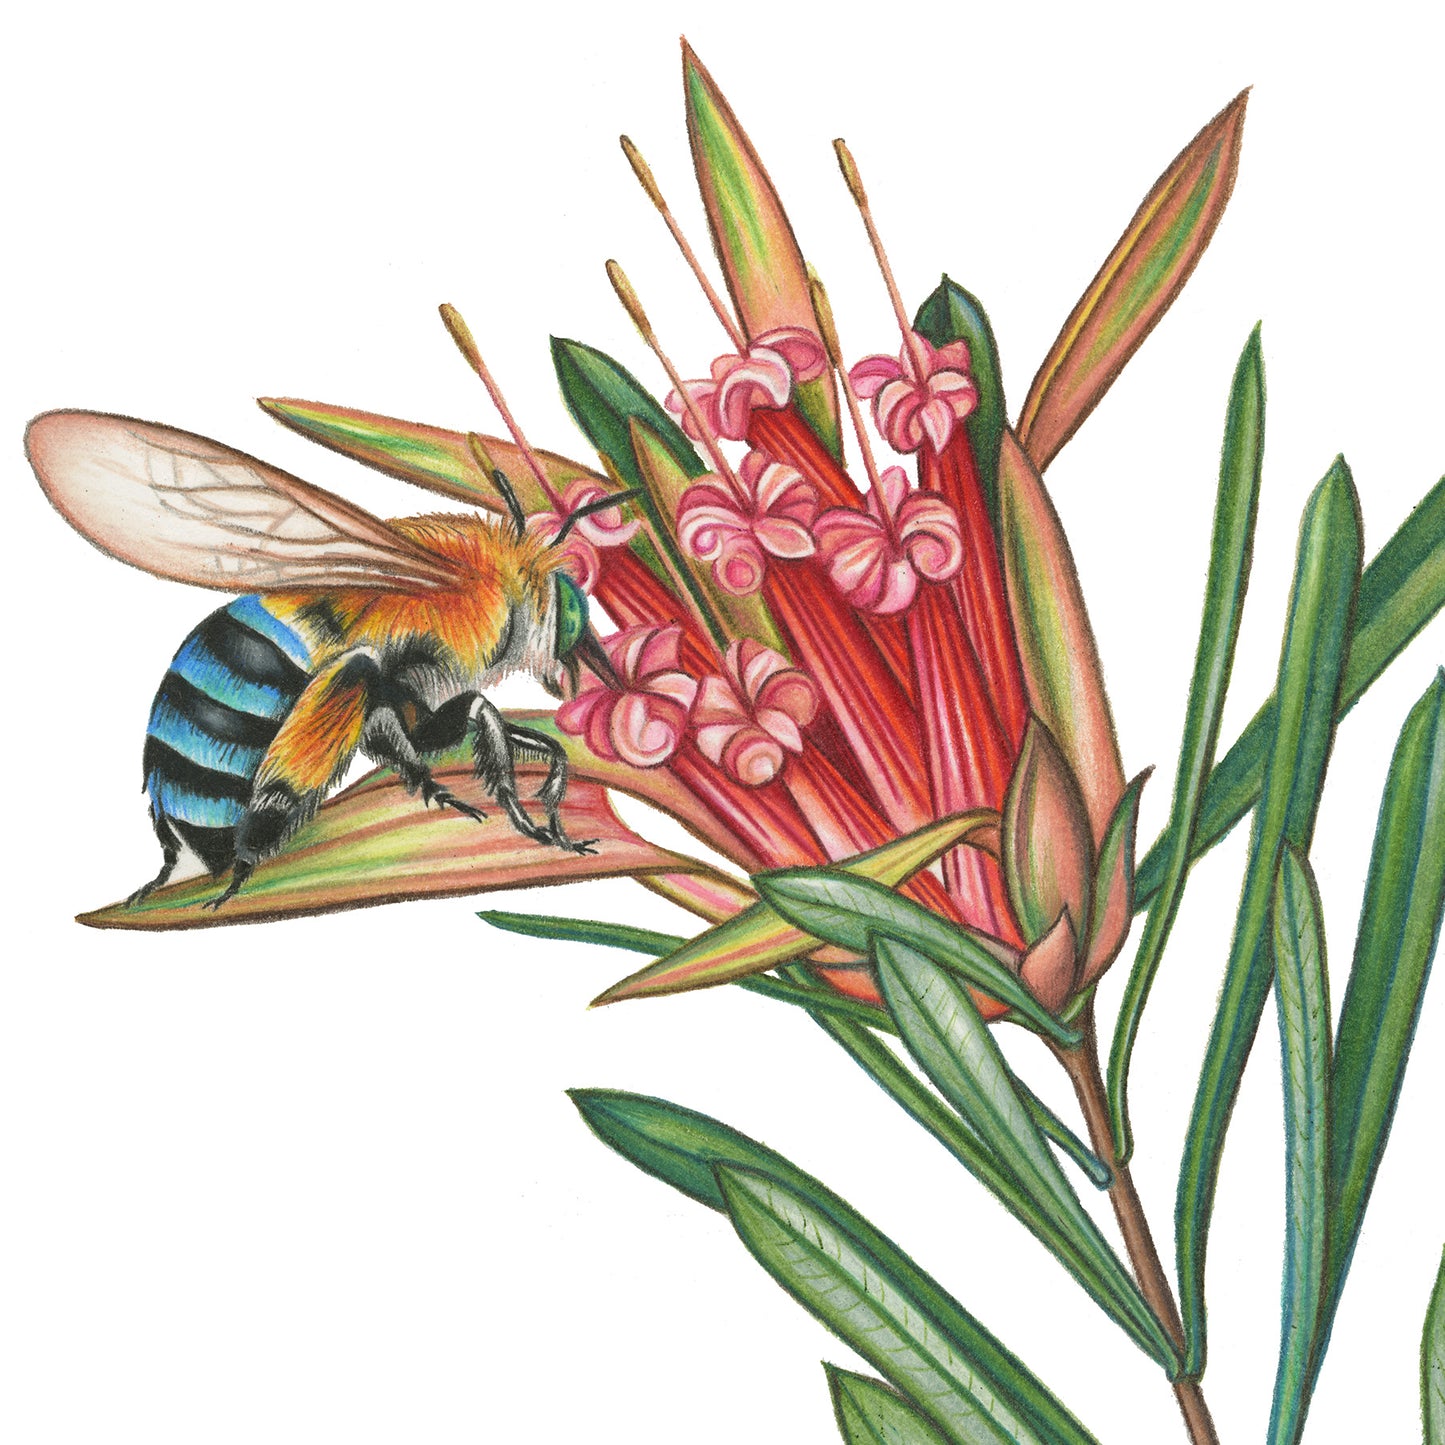 Hand drawn pencil art of blue-banded bees on a protea flower by Rachel Diaz-Bastin. Prints available. 